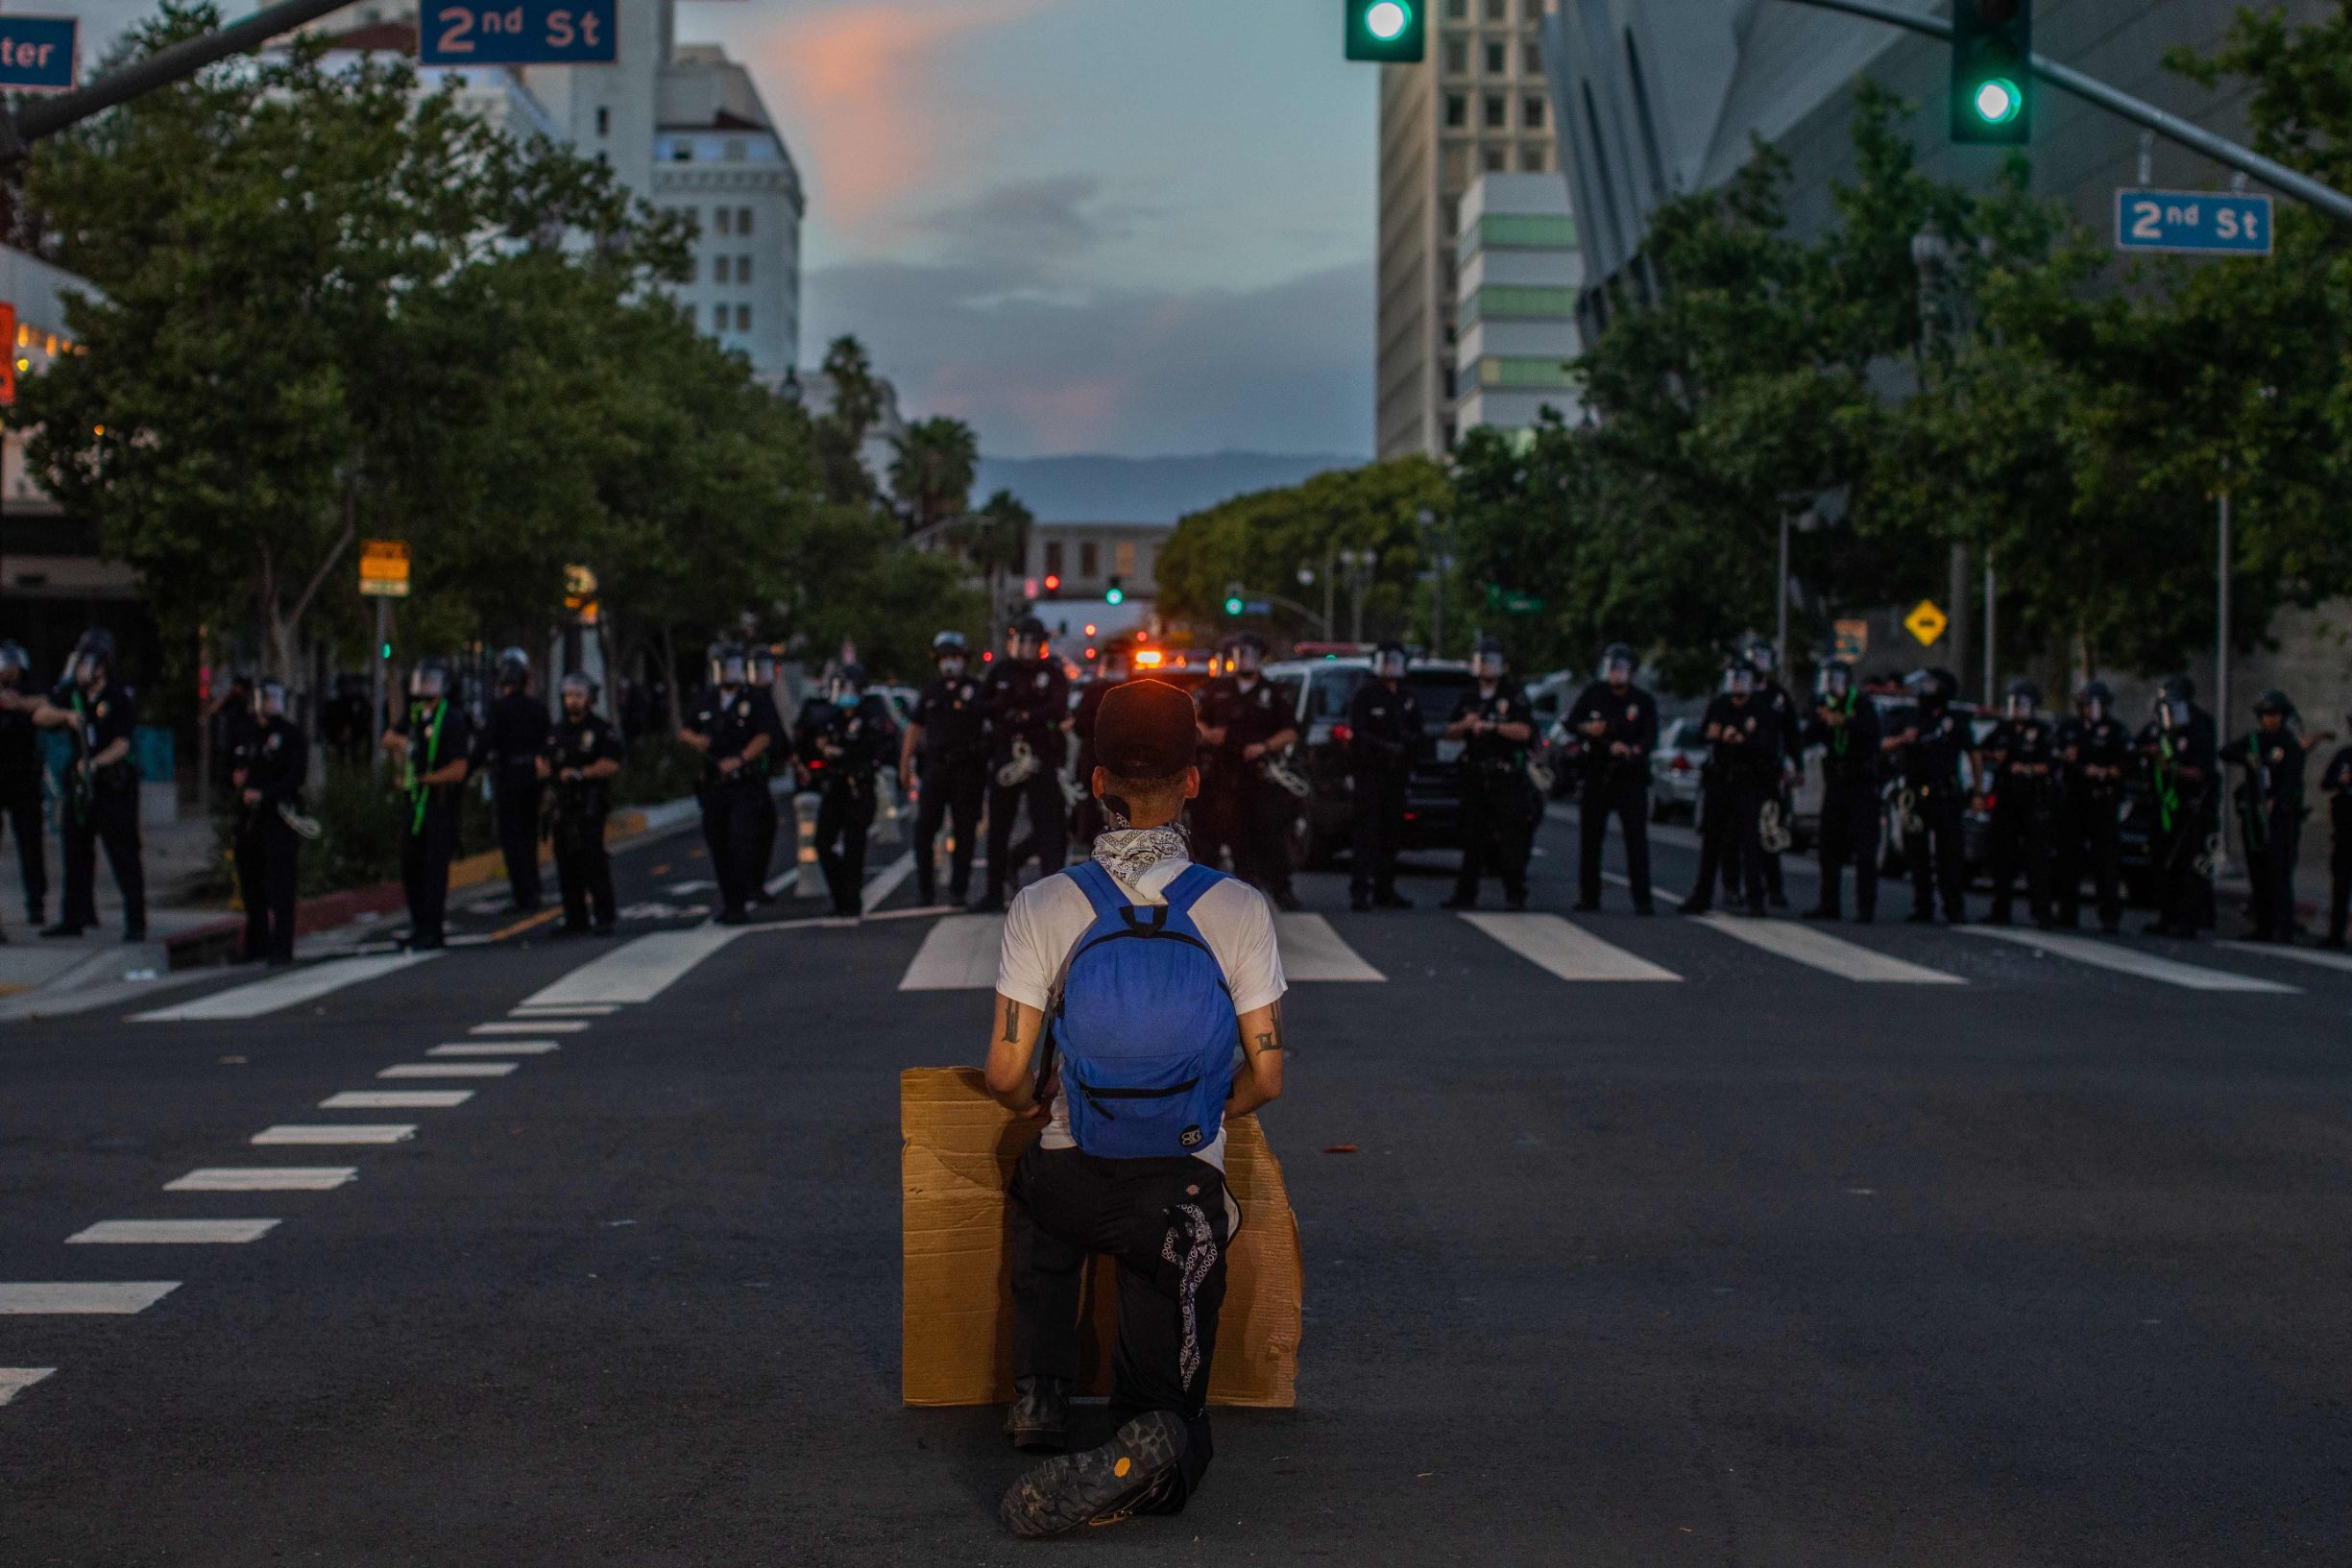 A demonstrator kneels in front of a Police line in Downtown Los Angeles on May 30, 2020 during a protest against the death of George Floyd, an unarmed black man who died while while being arrested and pinned to the ground by the knee of a Minneapolis police officer. - Clashes broke out and major cities imposed curfews as America began another night of unrest Saturday with angry demonstrators ignoring warnings from President Donald Trump that his government would stop violent protests over police brutality 